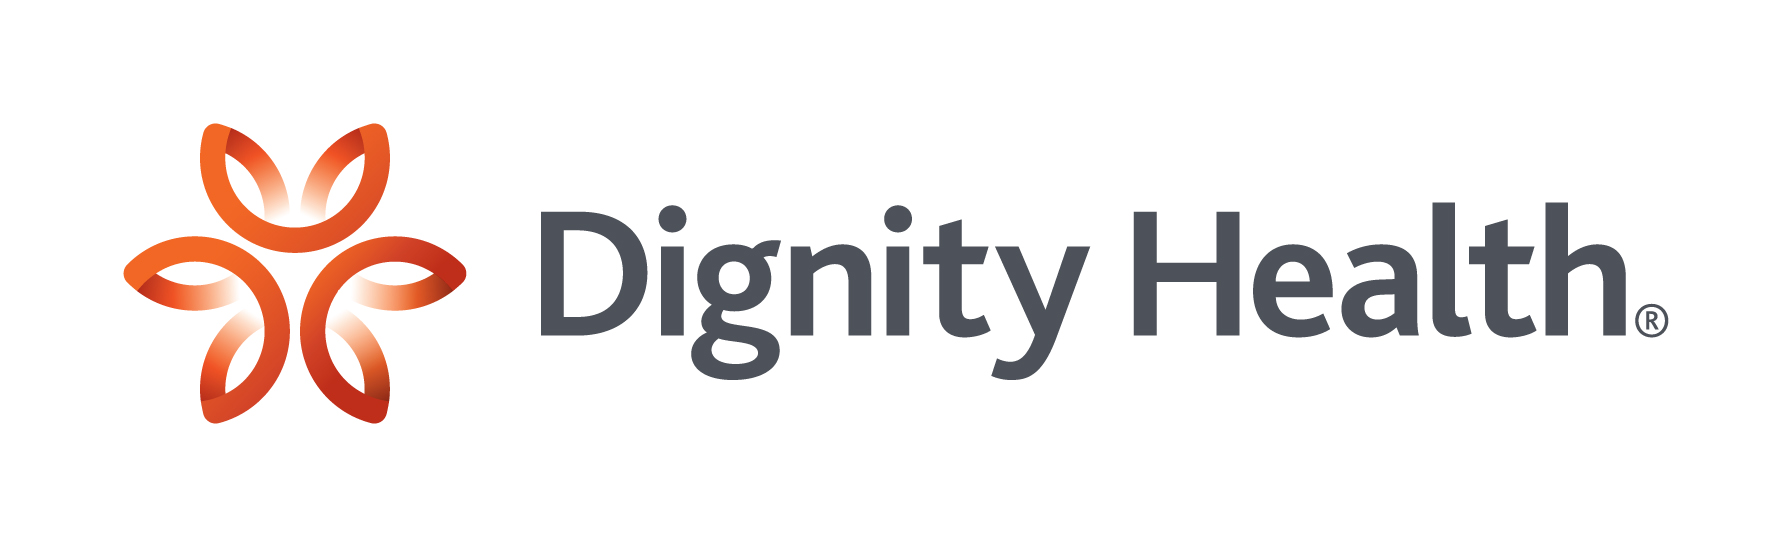 2. Dignity Health (Stage)